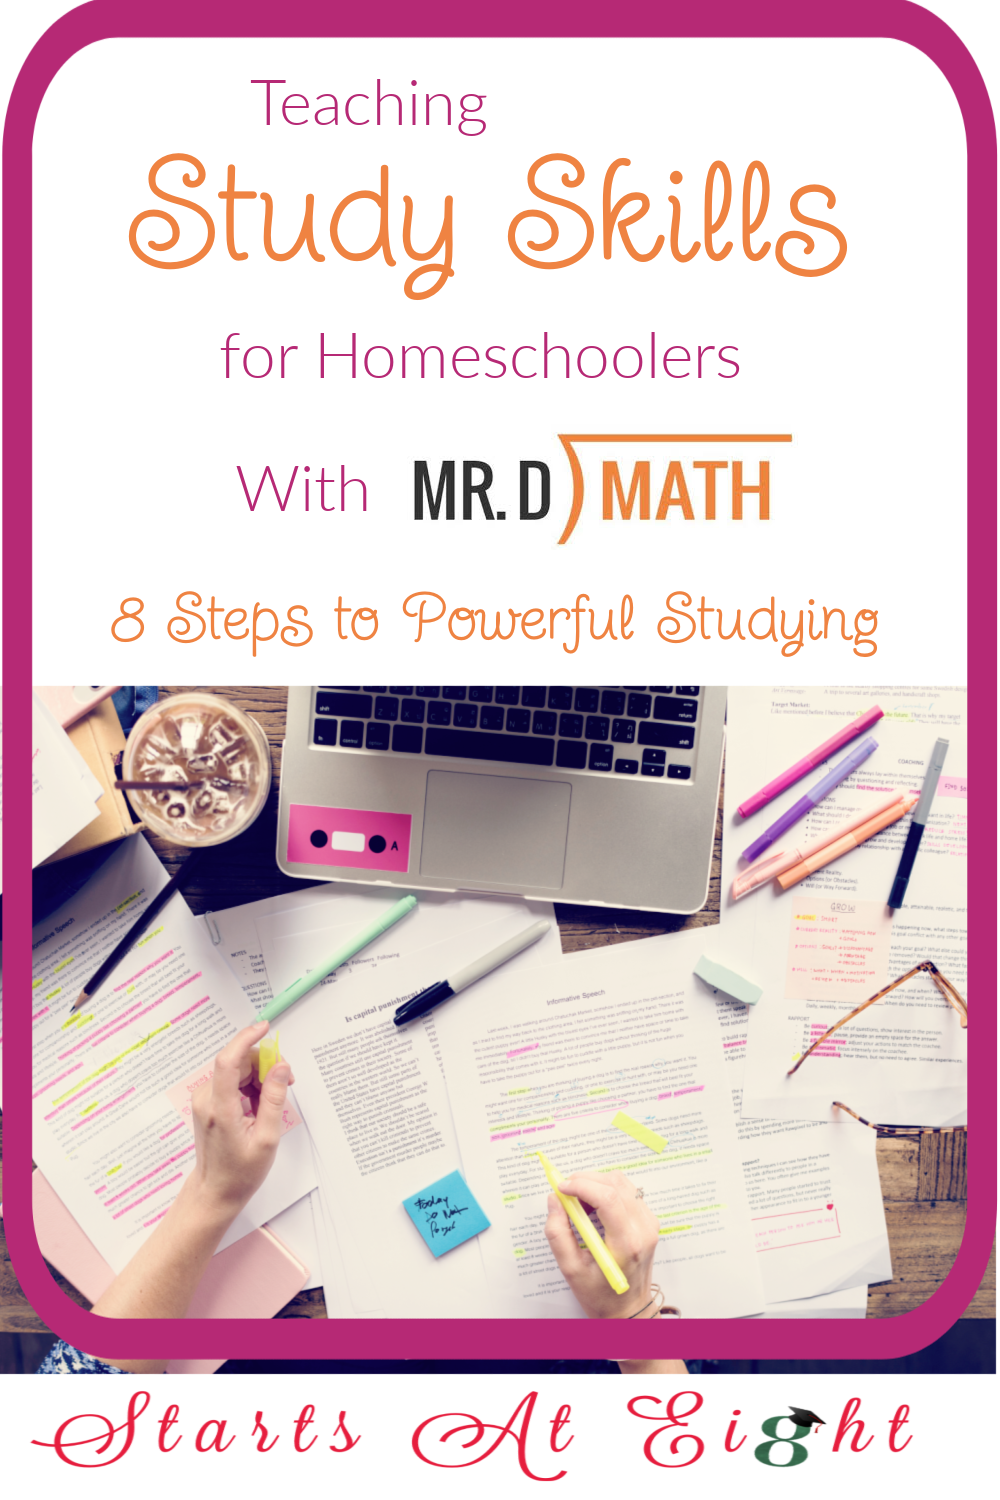 Help your homeschooler learn valuable notetaking and study skills with the self-paced Mr. D Math Study Skills course - 8 Steps to Powerful Studying. A review from Starts At Eight